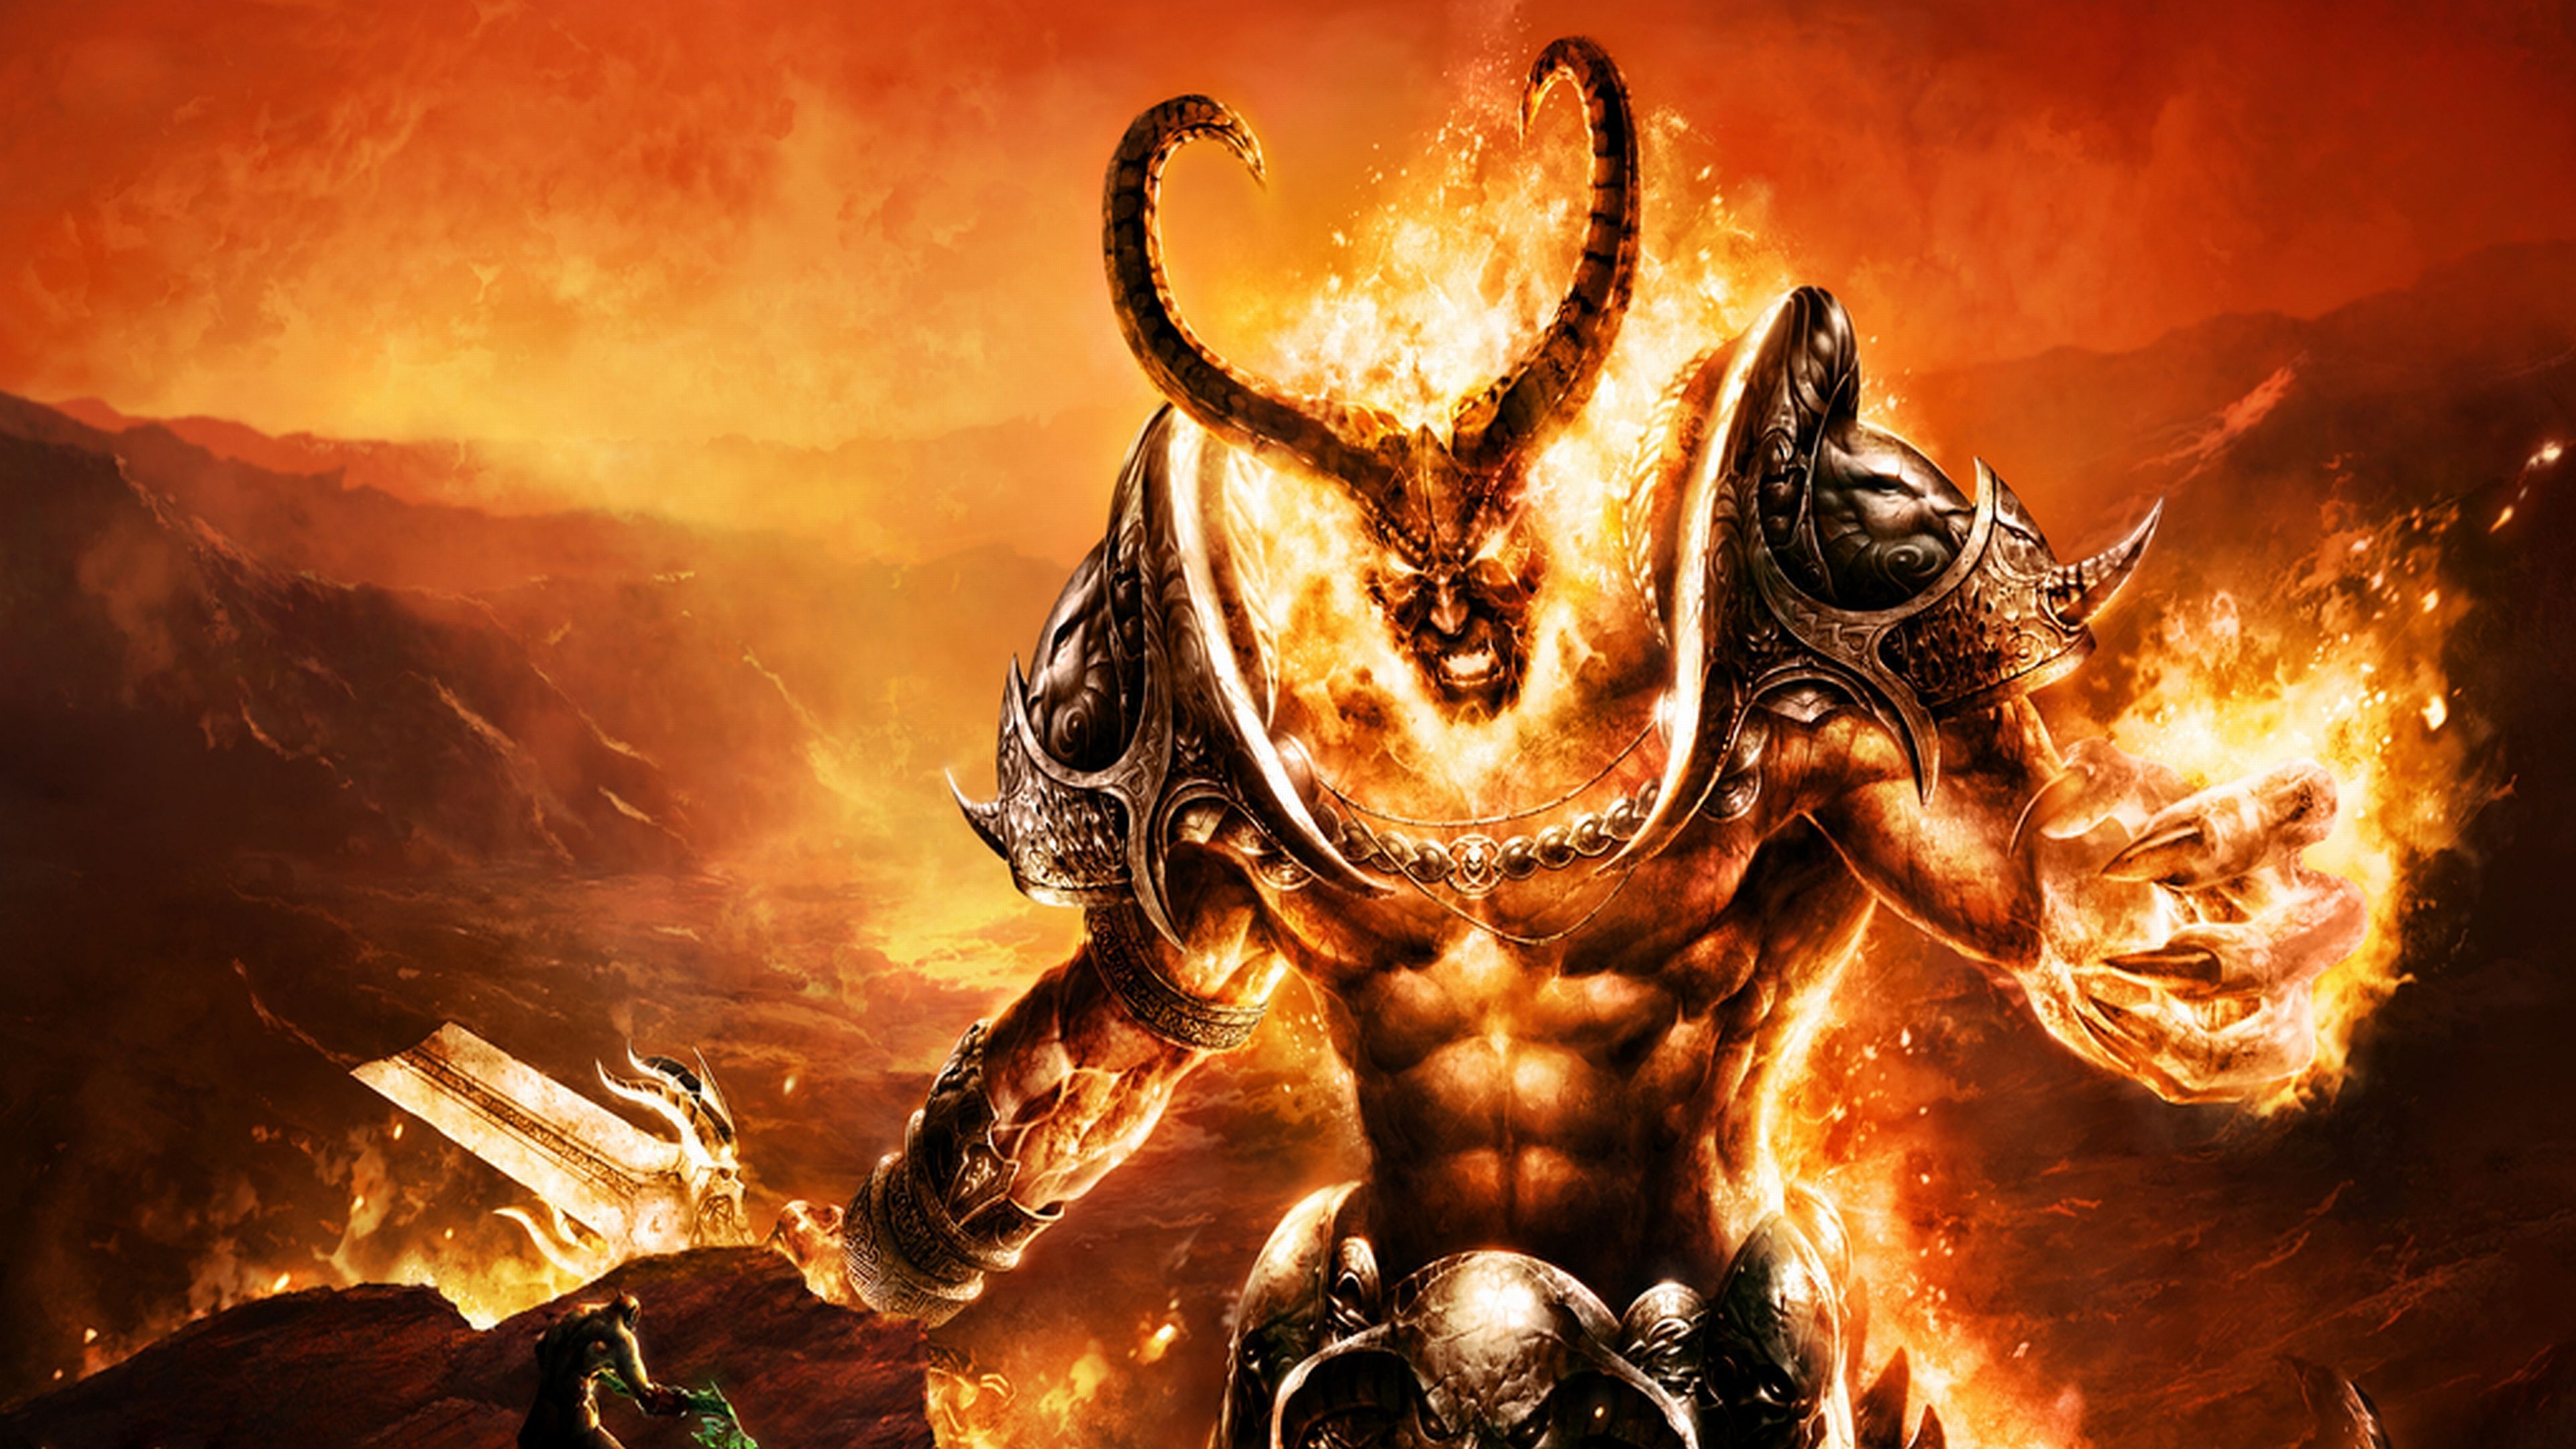 877 World Of Warcraft HD Wallpapers Backgrounds - Wallpaper Abyss